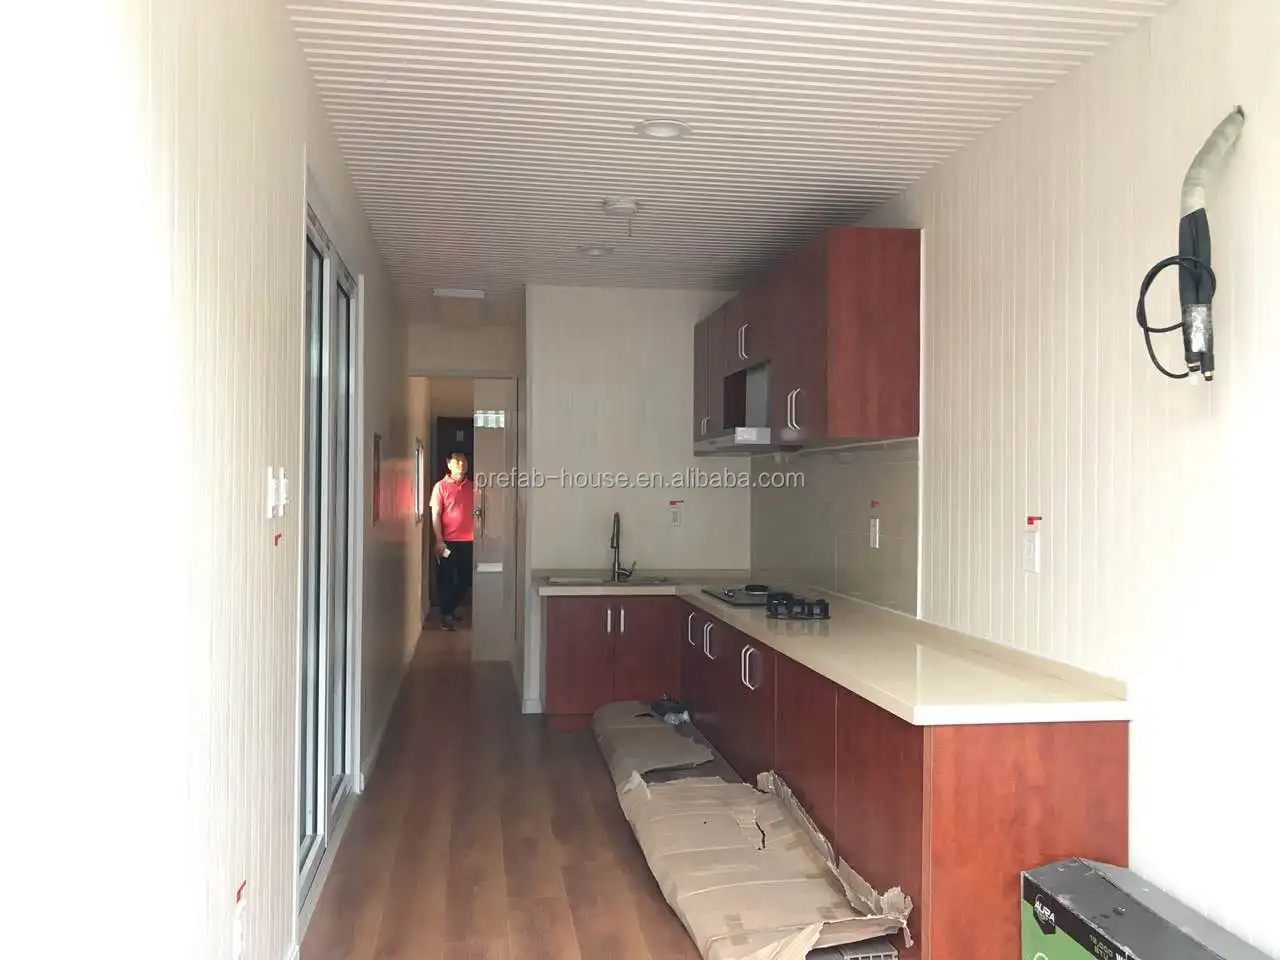 Shipping Container House From The Container Shipping Container Home 40 Feet Homes